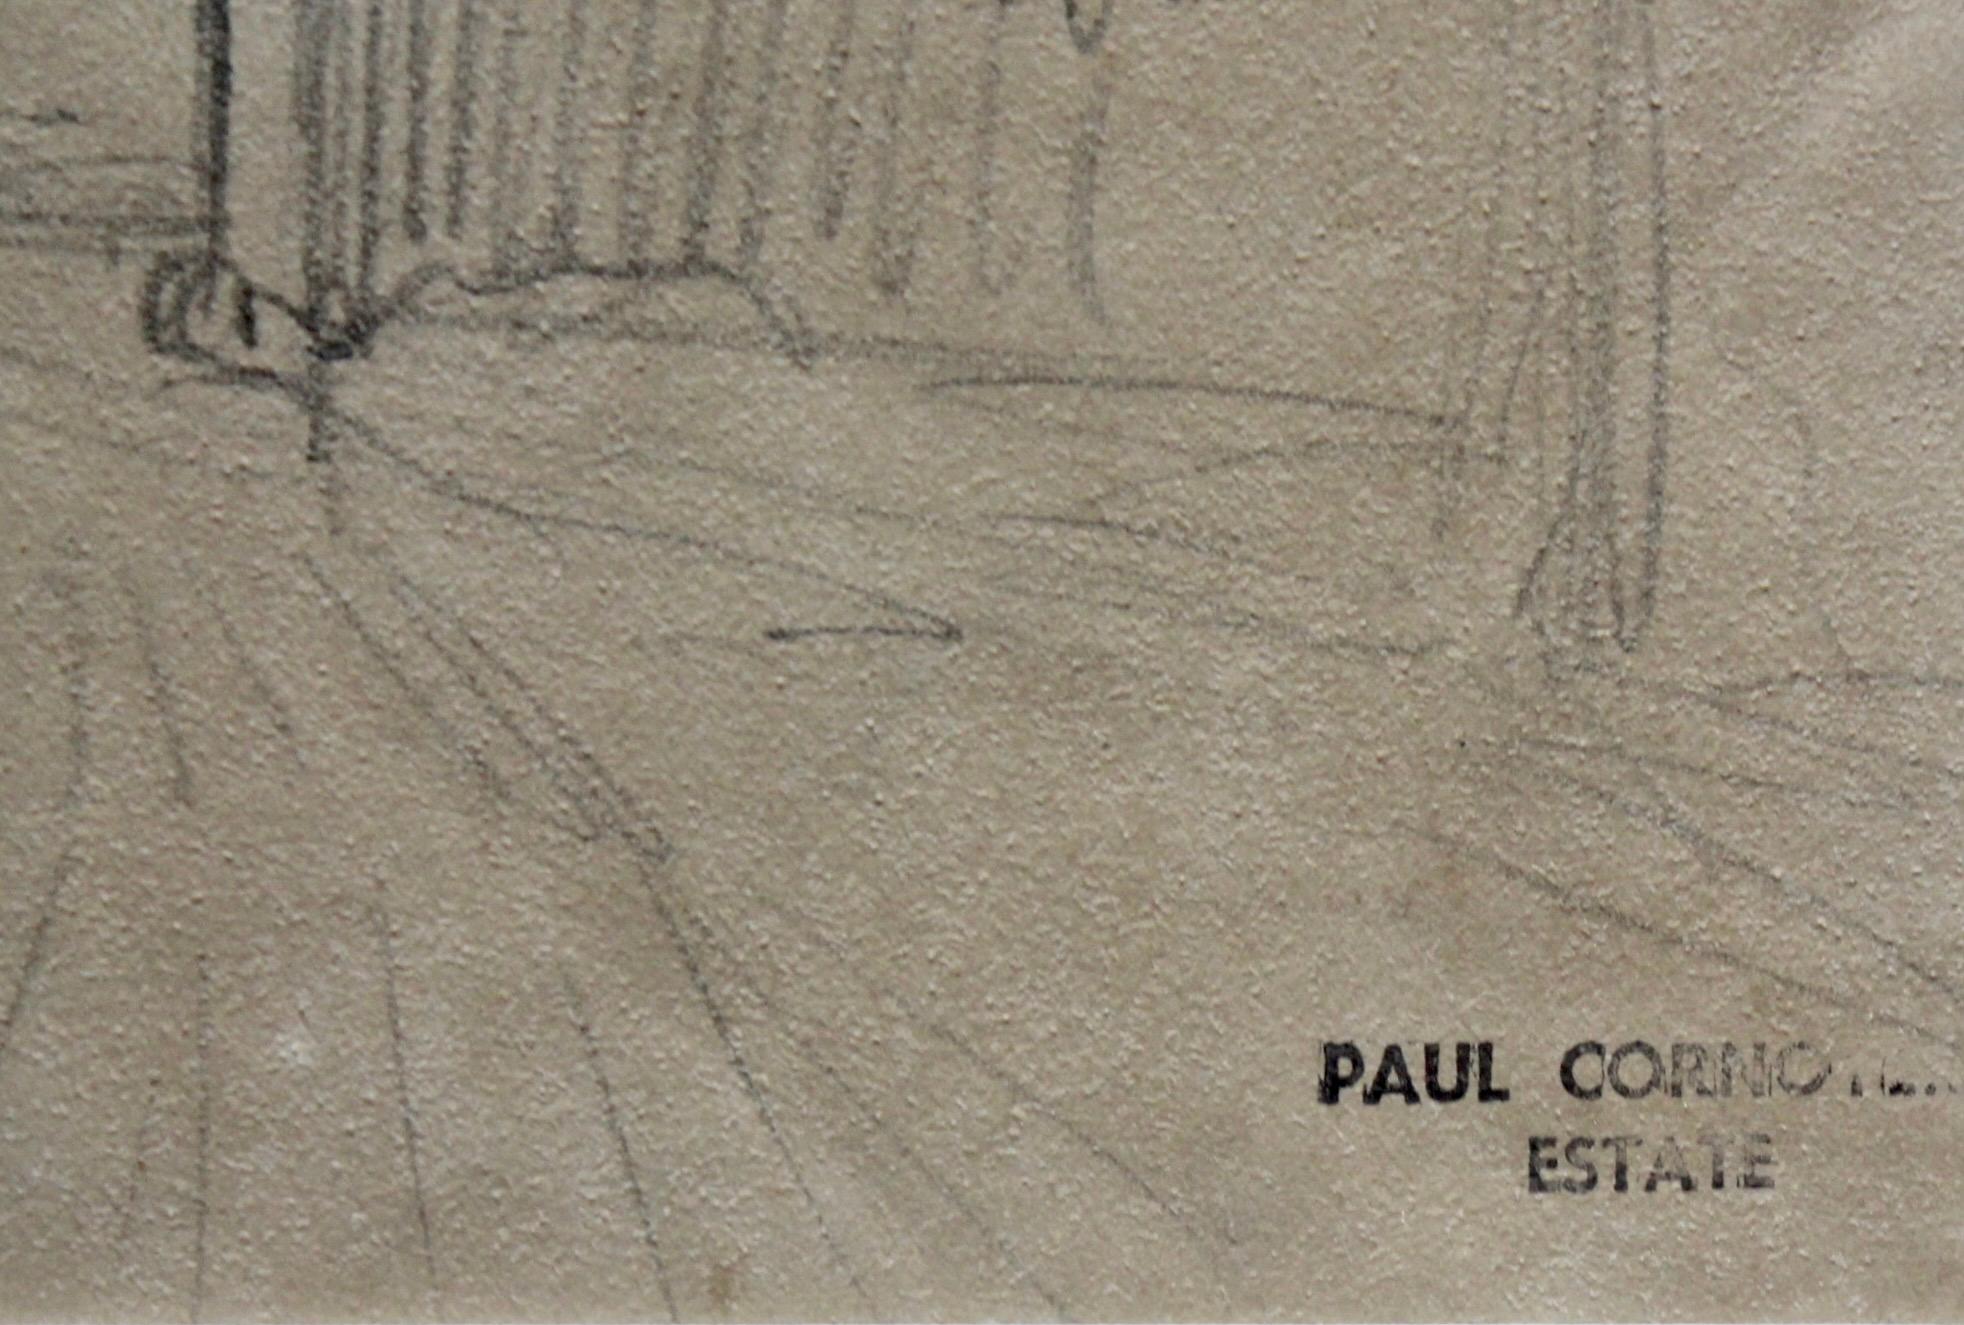 Hand-Crafted Paul Cornoyer 'Road through a Country Village